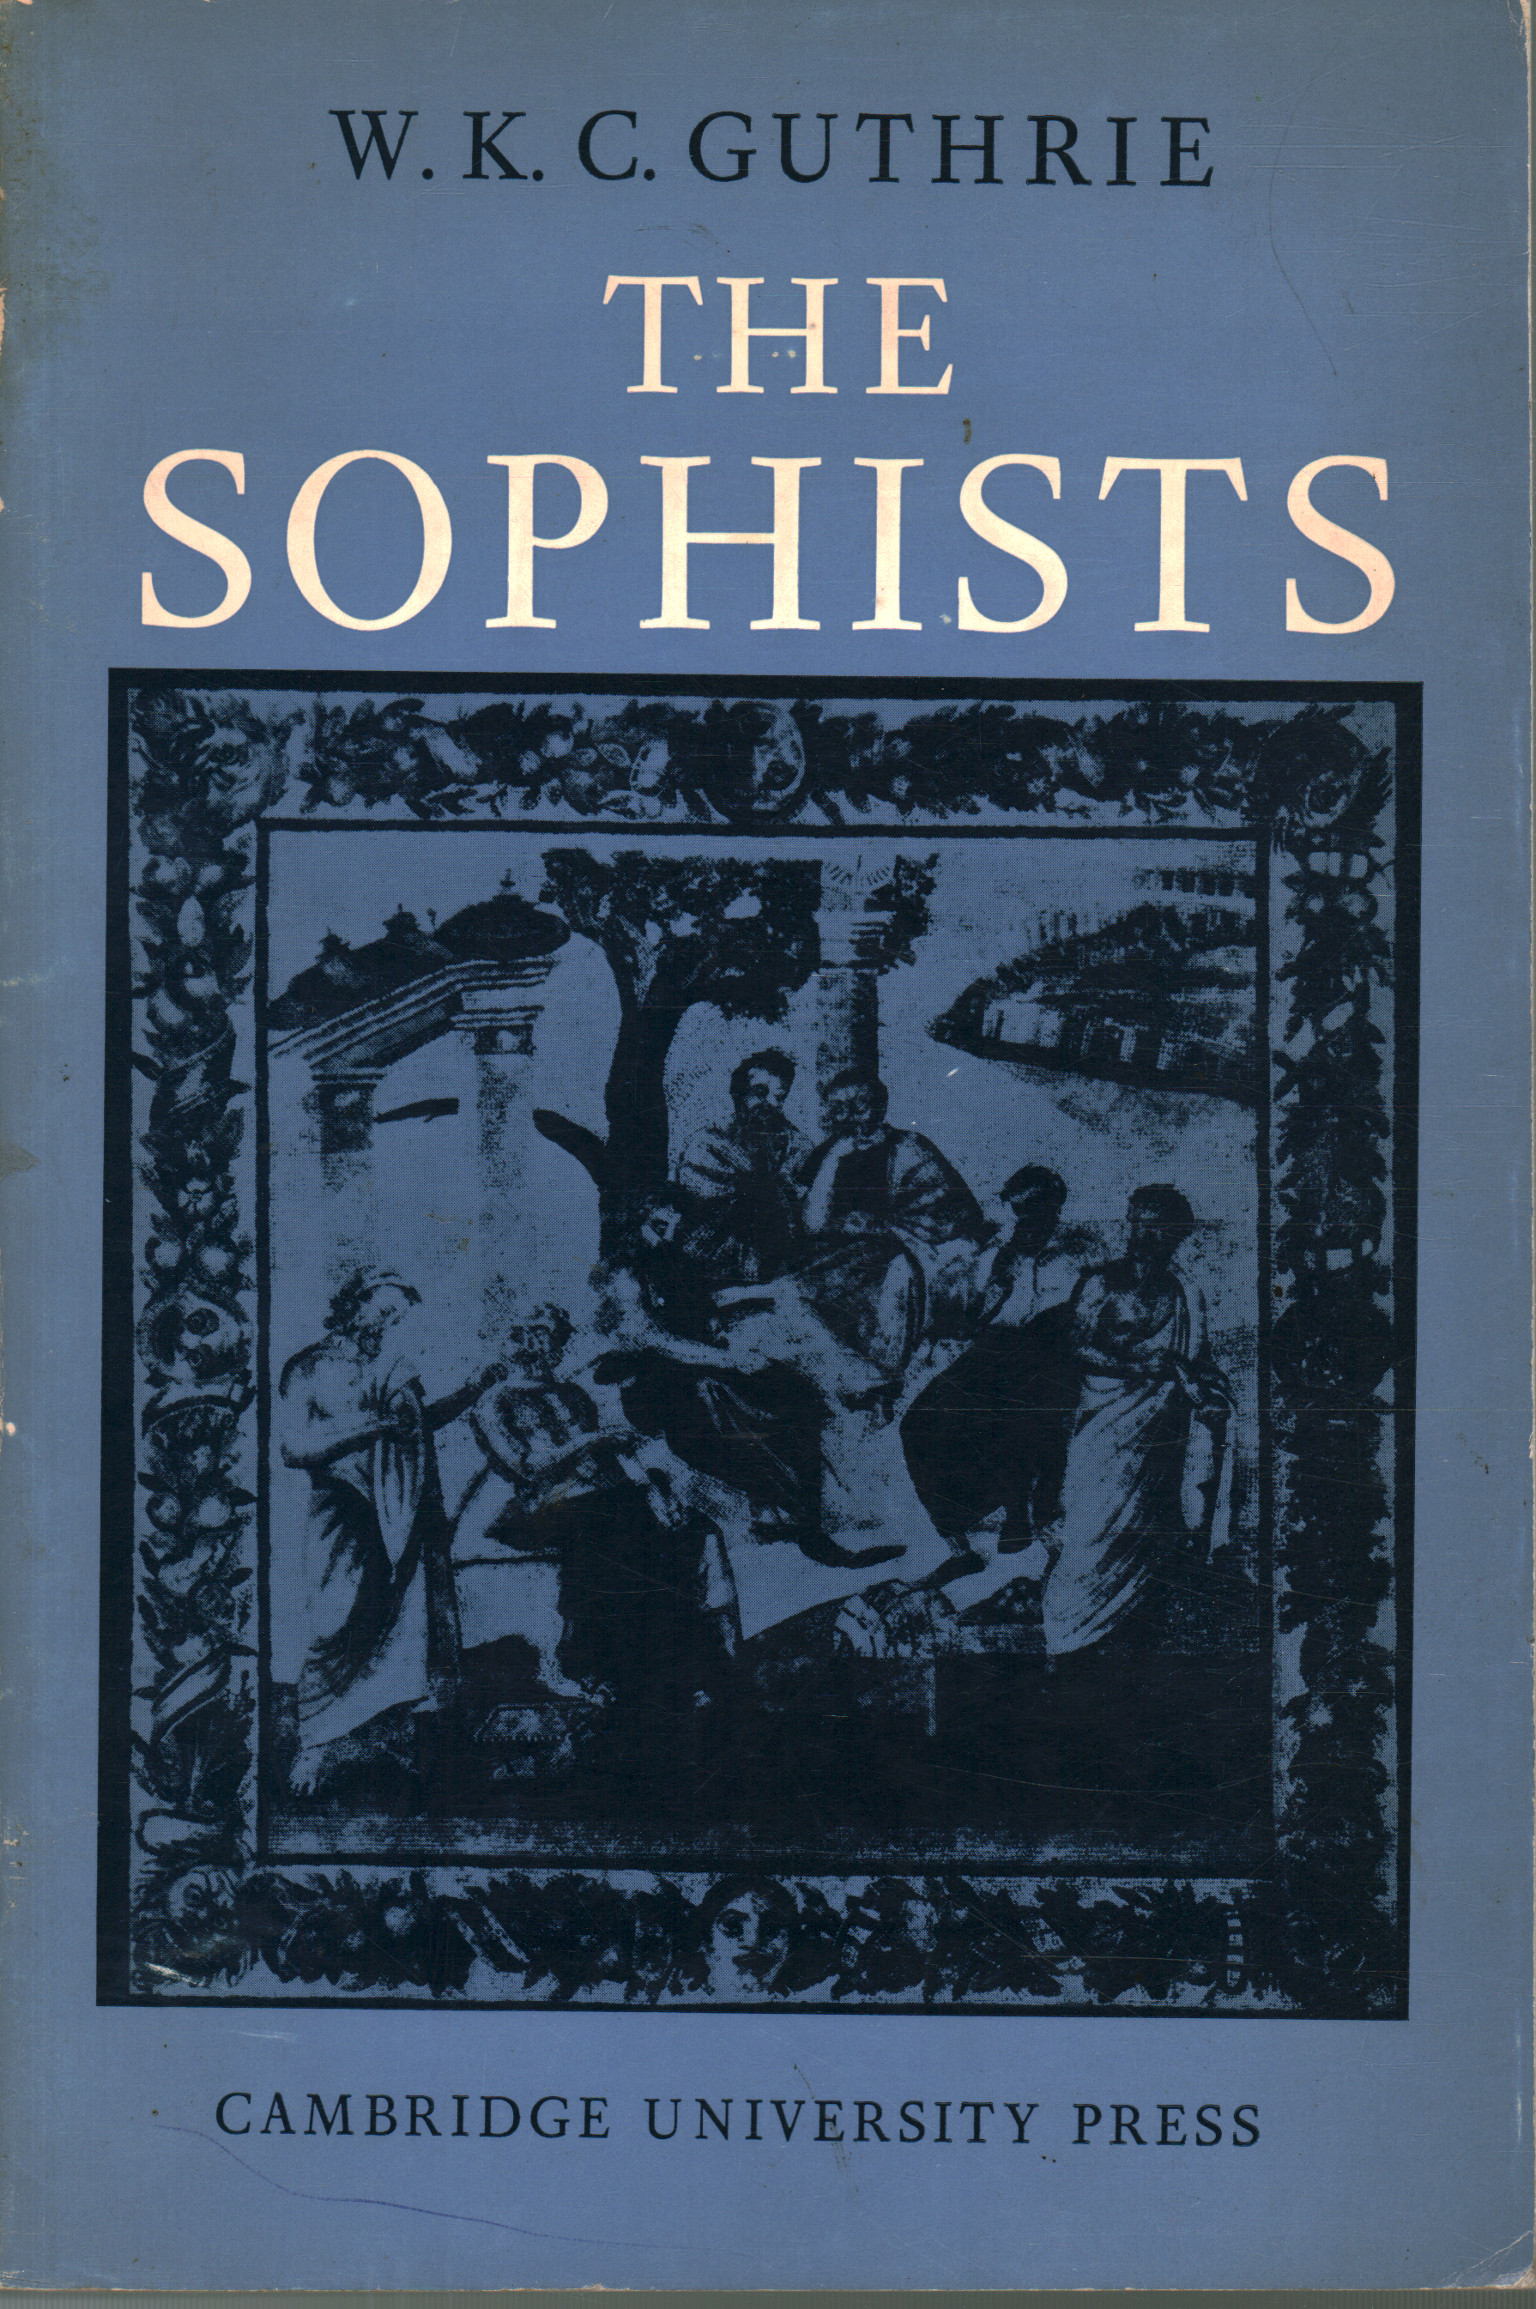 The sophists, W.K.C. Guthrie